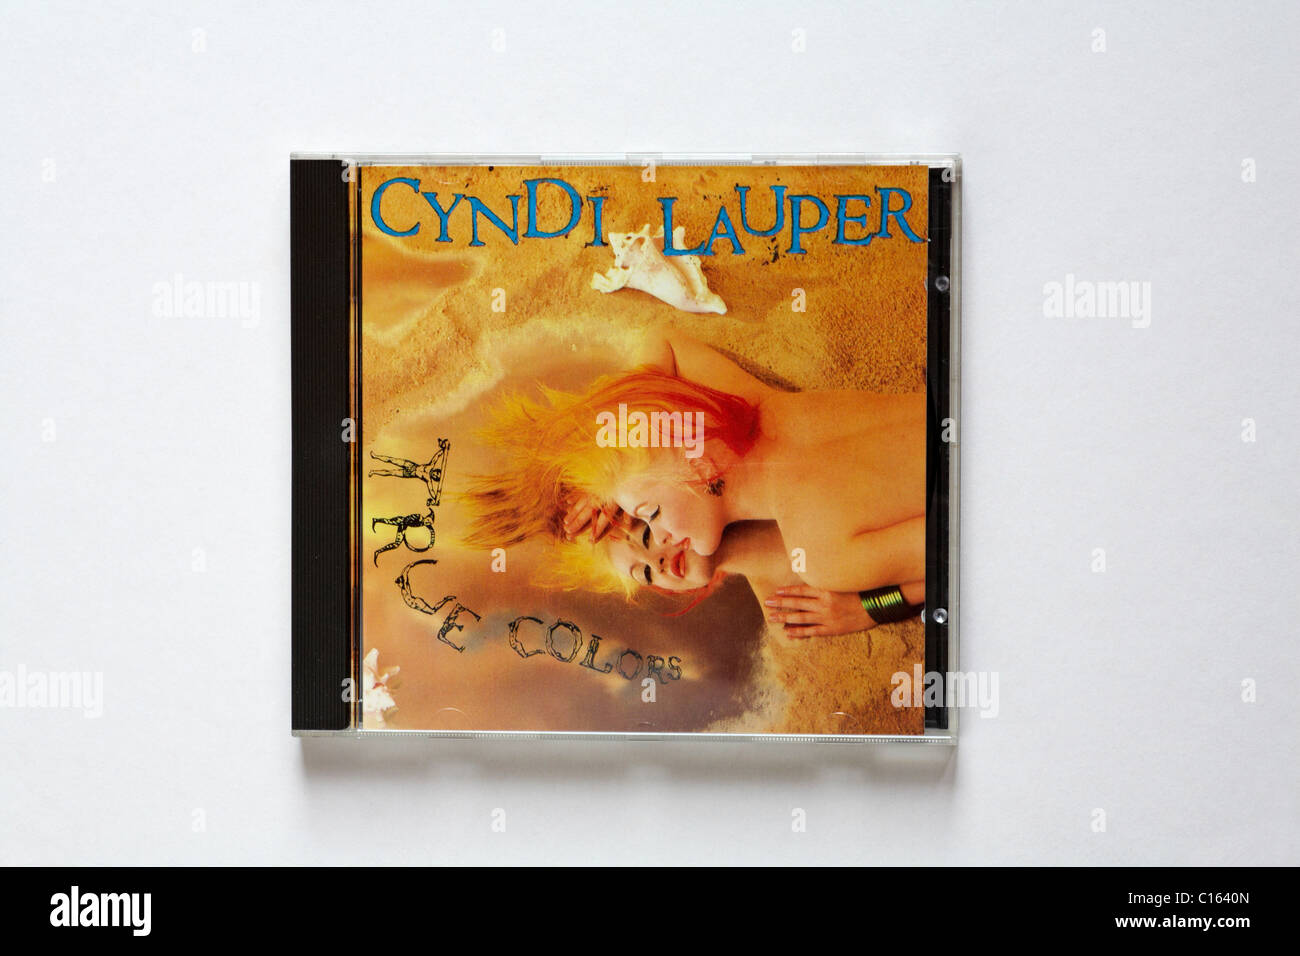 Cyndi Lauper CD - True Colours isolated on white background Stock Photo